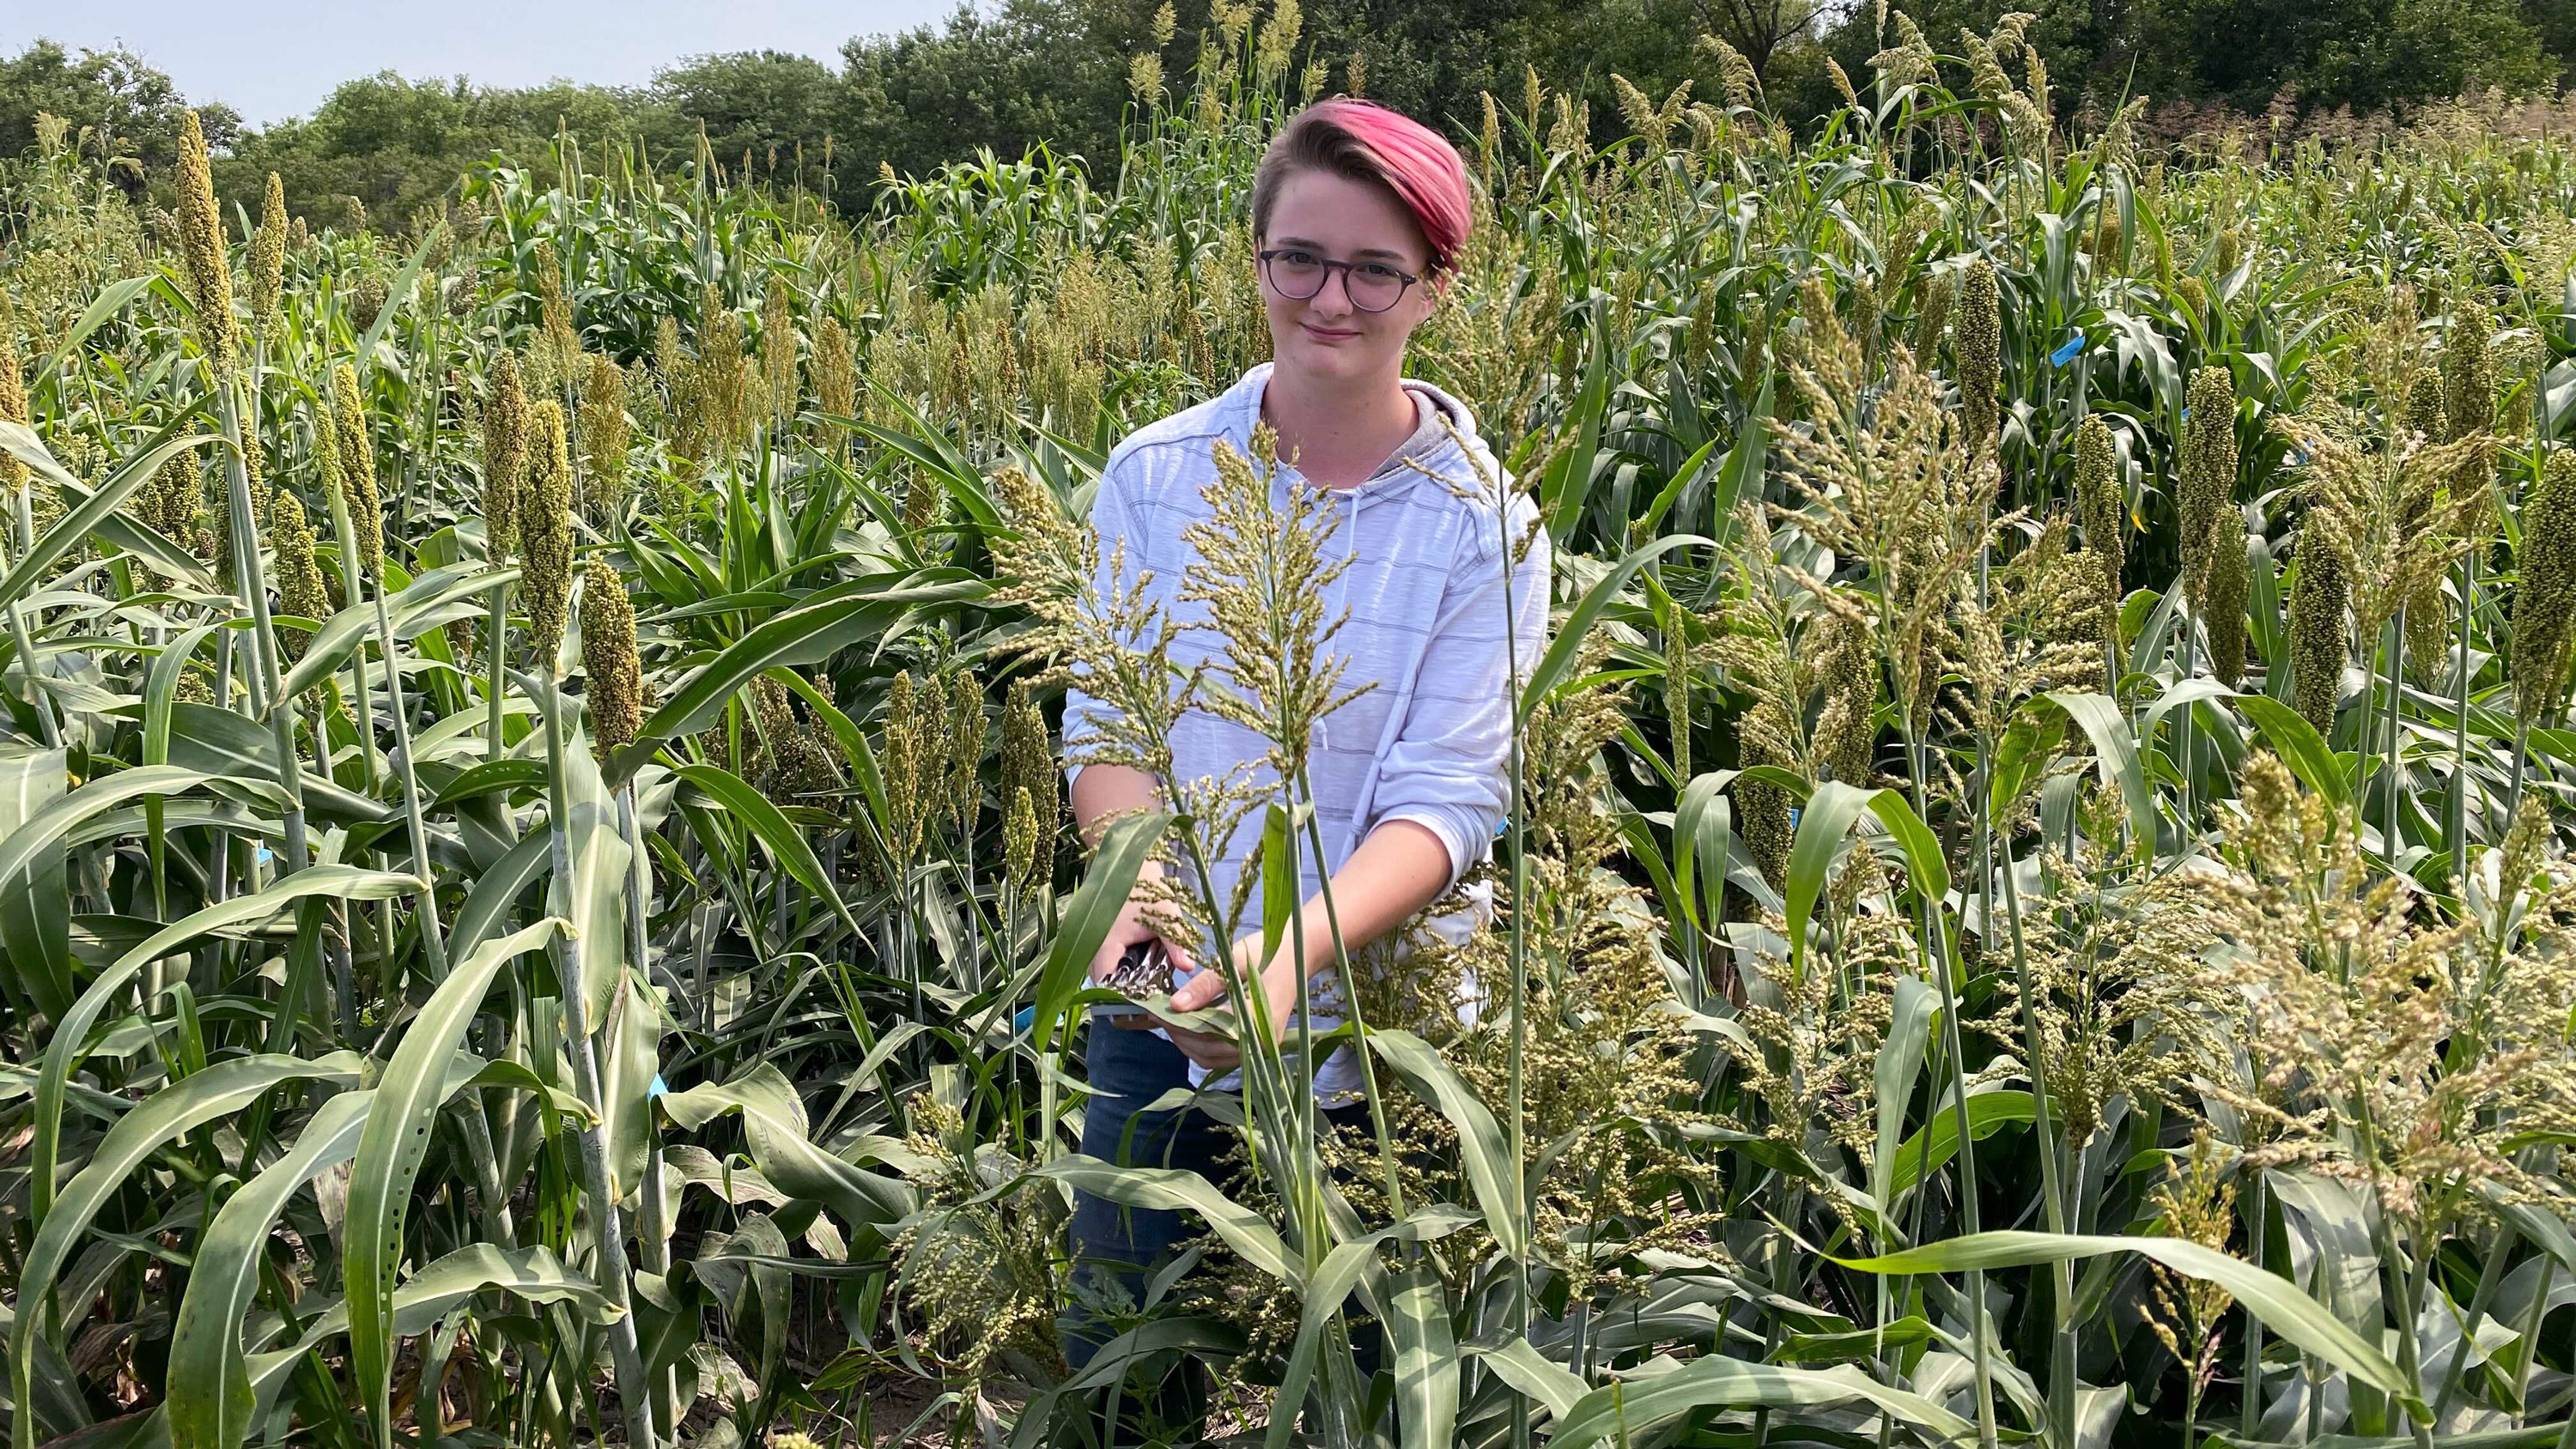 Ryleigh Grove, a North Star High School senior, measures leaf angles of sorghum for research project in the Schnable Lab as part of Young Nebraska Scientists summer program. James Schnable | Agronomy and Horticulture